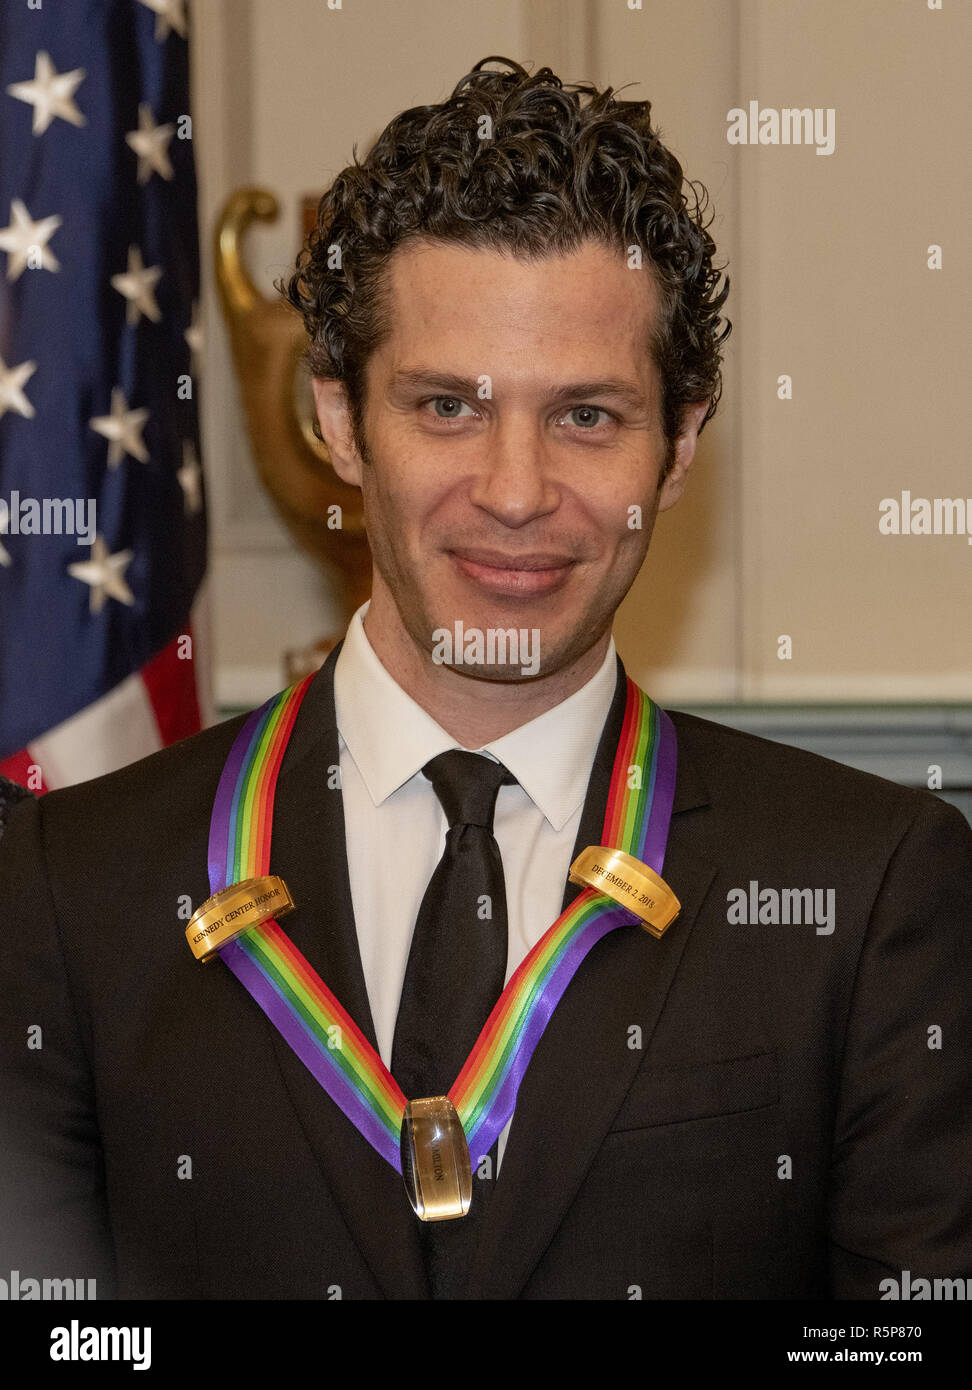 December 1, 2018 - Washington, District of Columbia, U.S. - Thomas Kail, one of the special honorees for Groundbreaking Work on Hamilton, as he poses with the recipients of the 41st Annual Kennedy Center Honors pose for a group photo following a dinner hosted by United States Deputy Secretary of State John J. Sullivan in their honor at the US Department of State in Washington, DC on Saturday, December 1, 2018. The 2018 honorees are: singer and actress Cher; composer and pianist Philip Glass; Country music entertainer Reba McEntire; and jazz saxophonist and composer Wayne Shorter. This year, Stock Photo